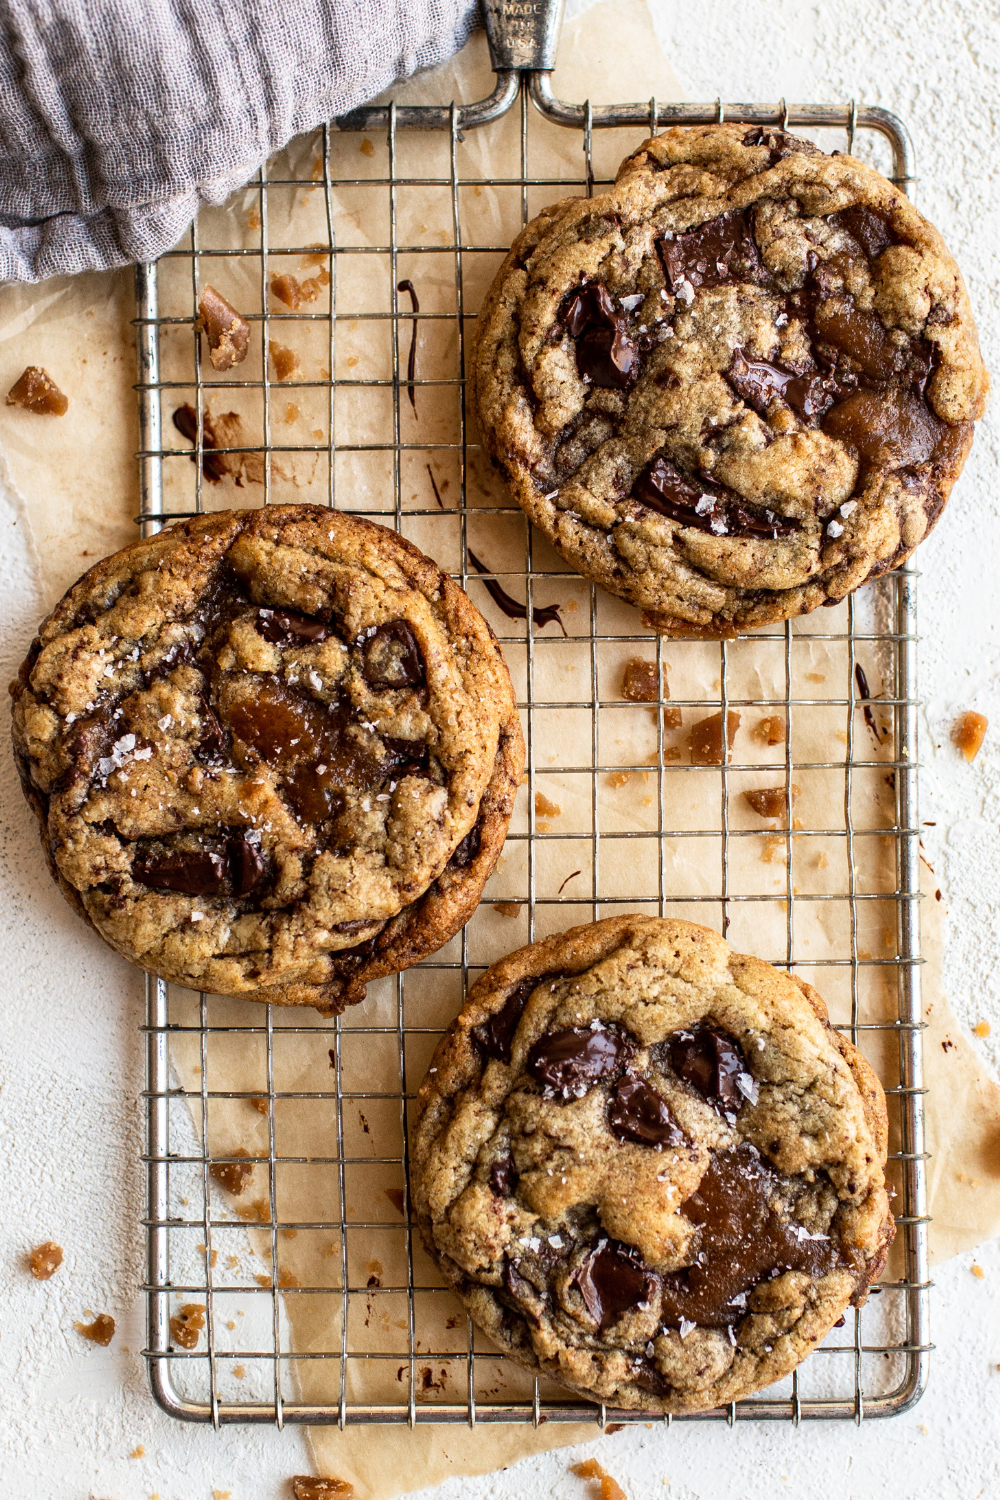 the most amazing cookie recipe ever!!!! Browned Butter Toffee Chocolate Chip Cookies are truly next level.